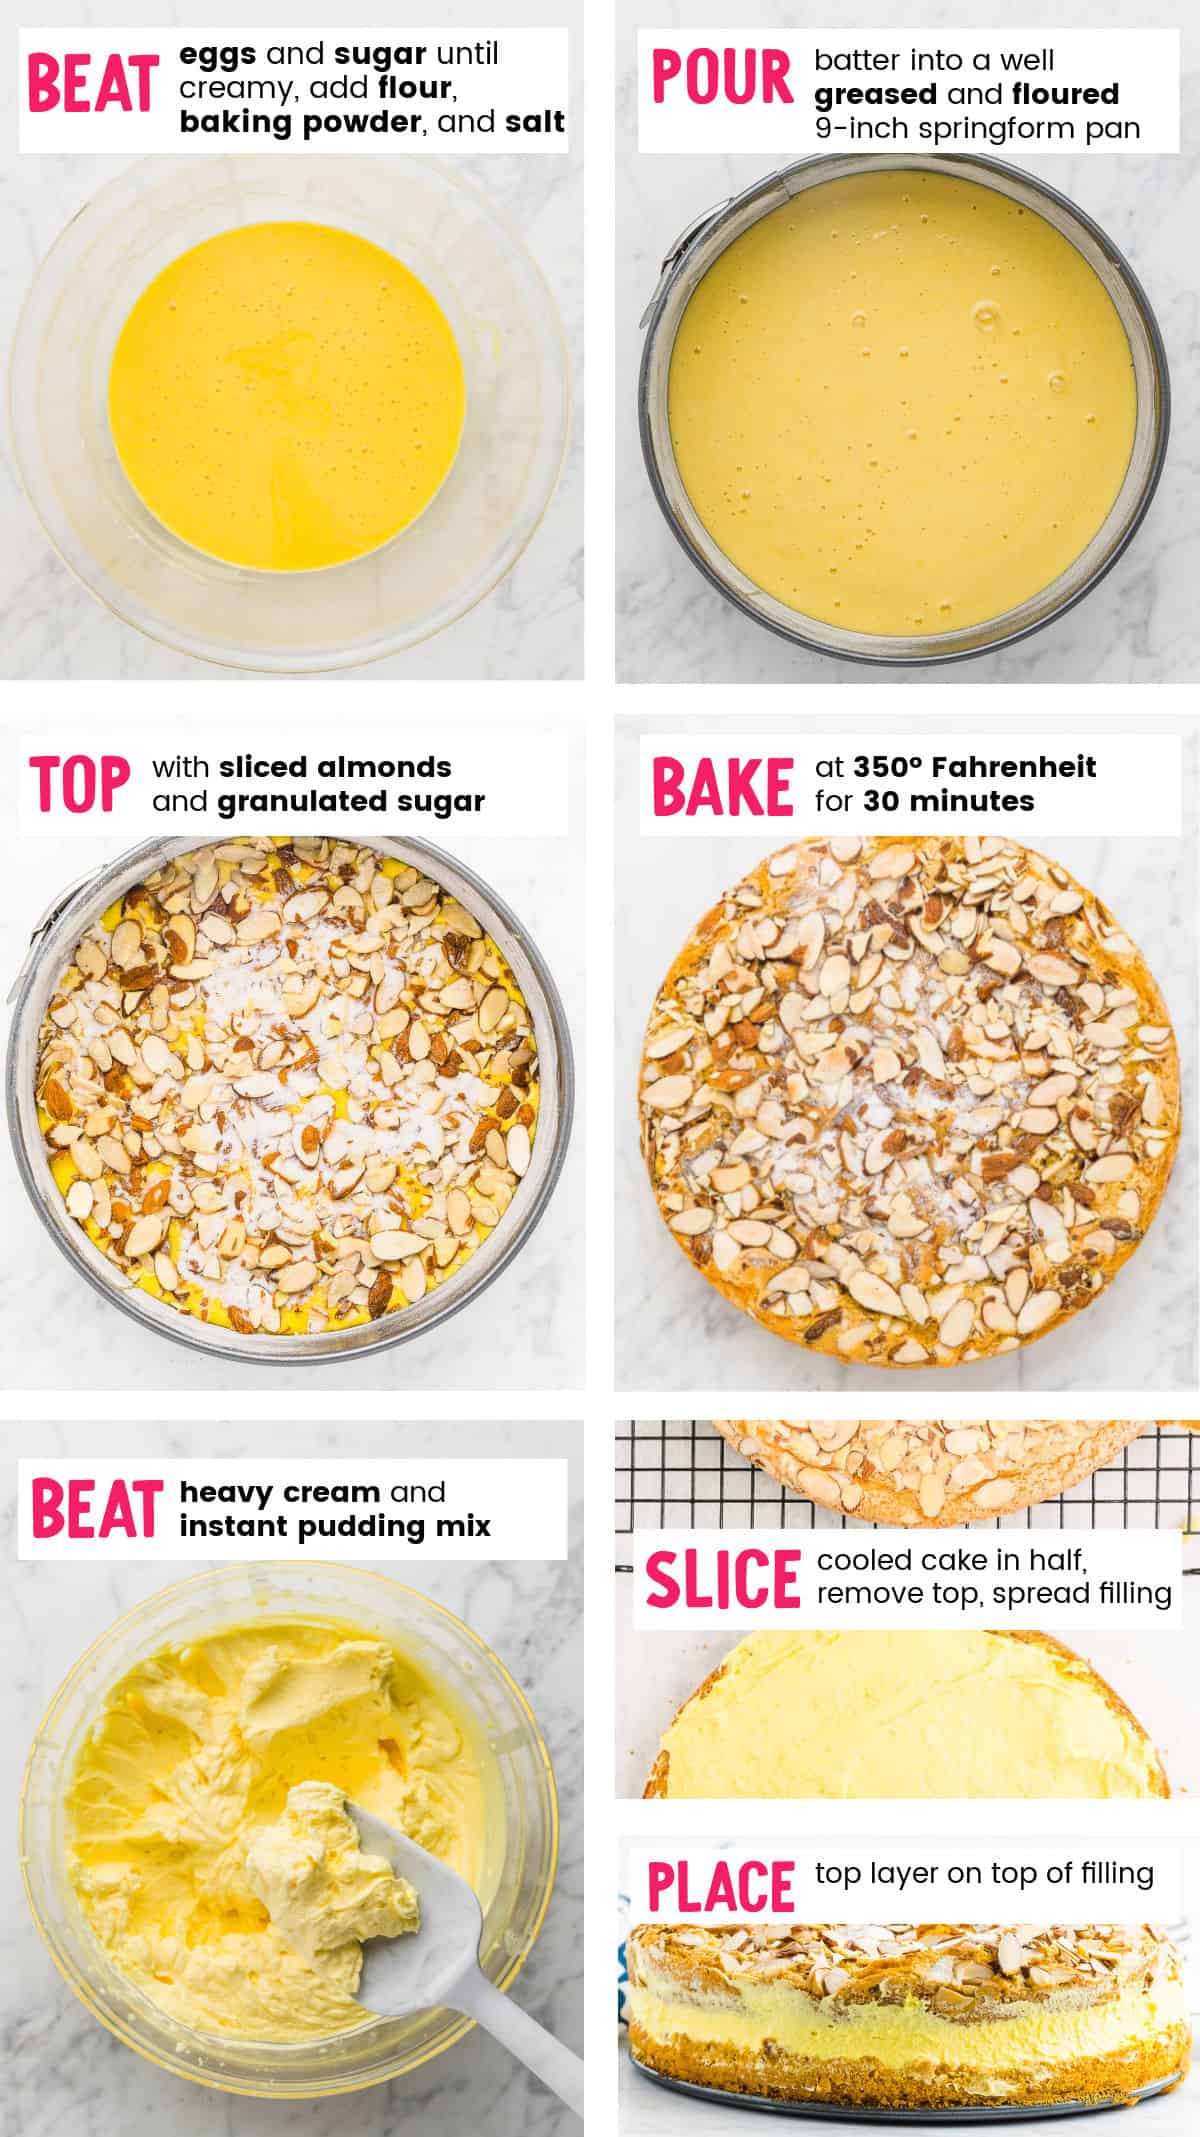 Steps showing how to make a Bee Sting Cake.